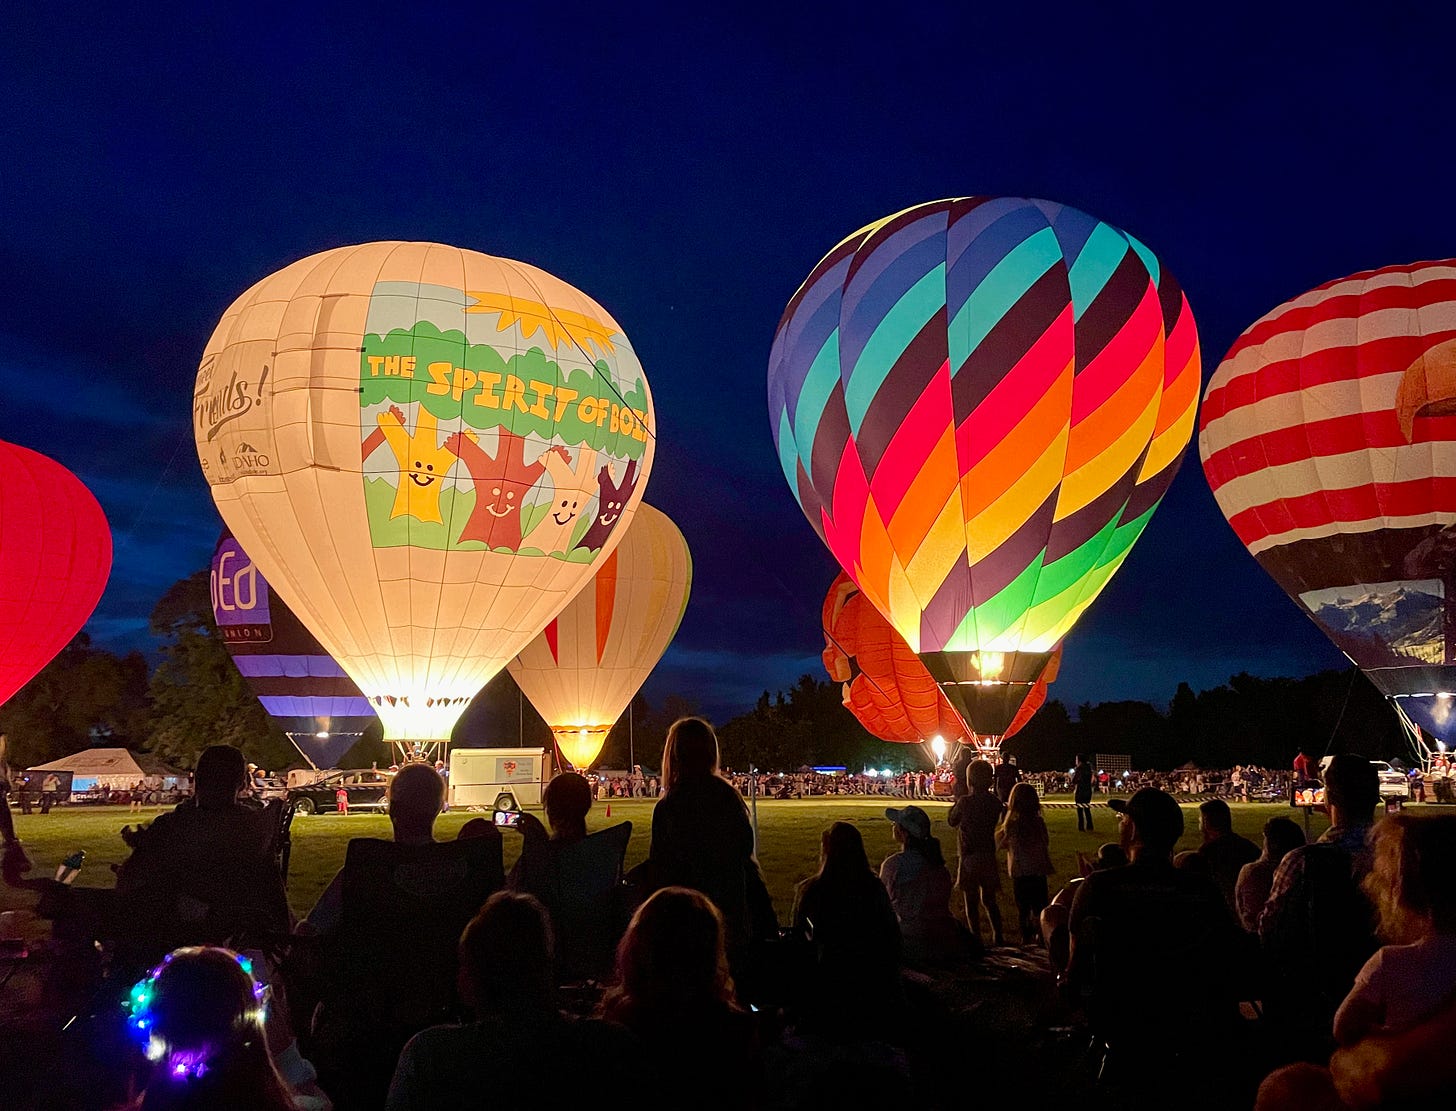 Multiple hot air balloons at night lighting up the park